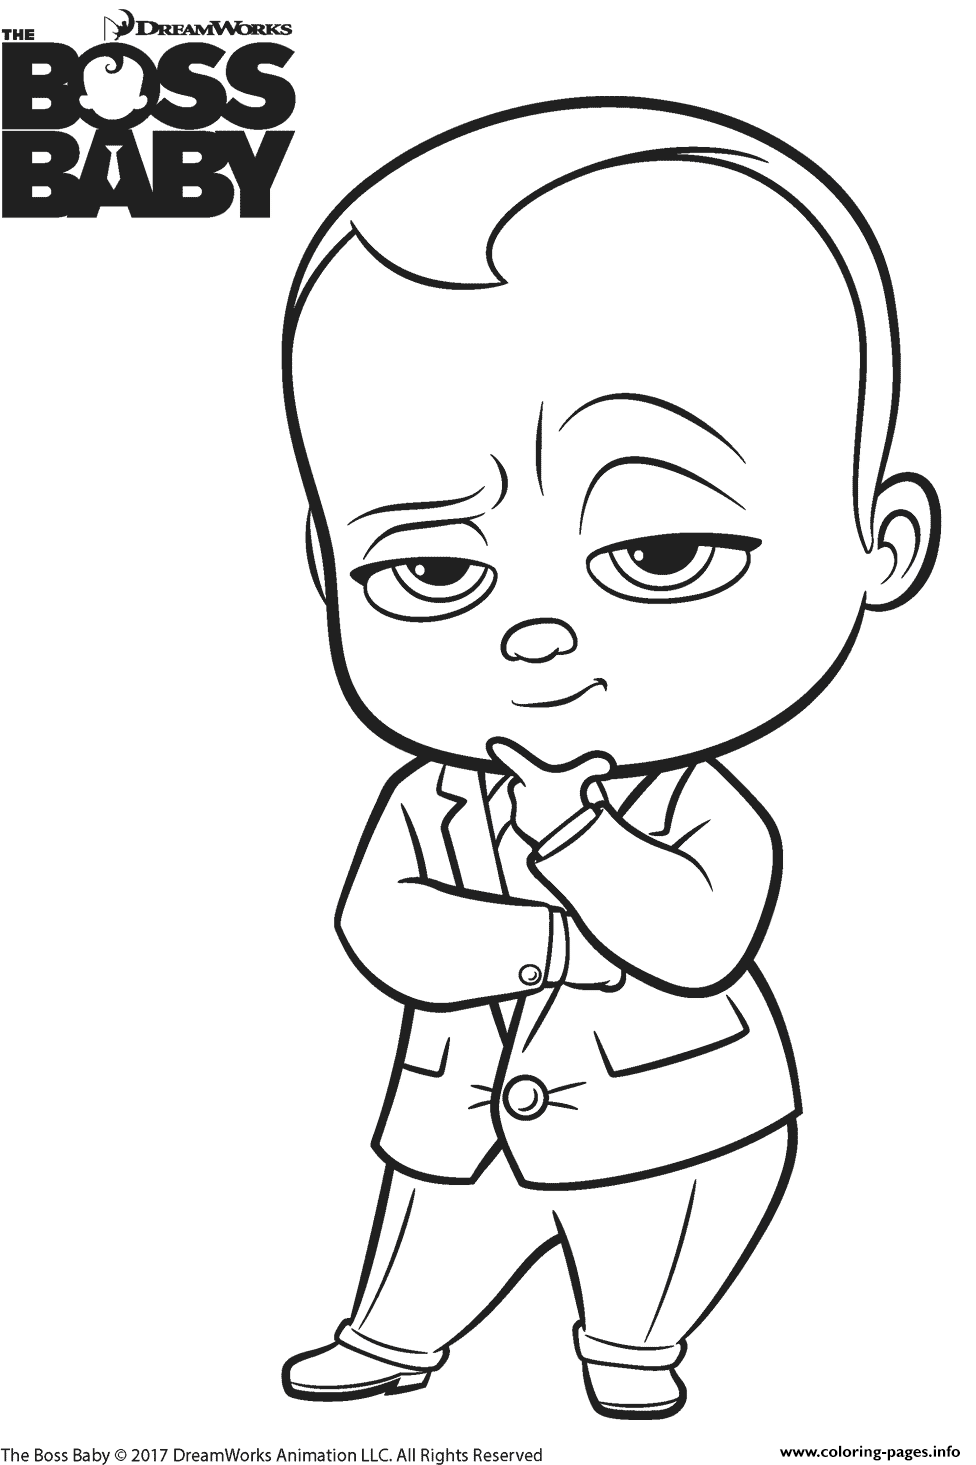 The Boss Baby Templeton coloring